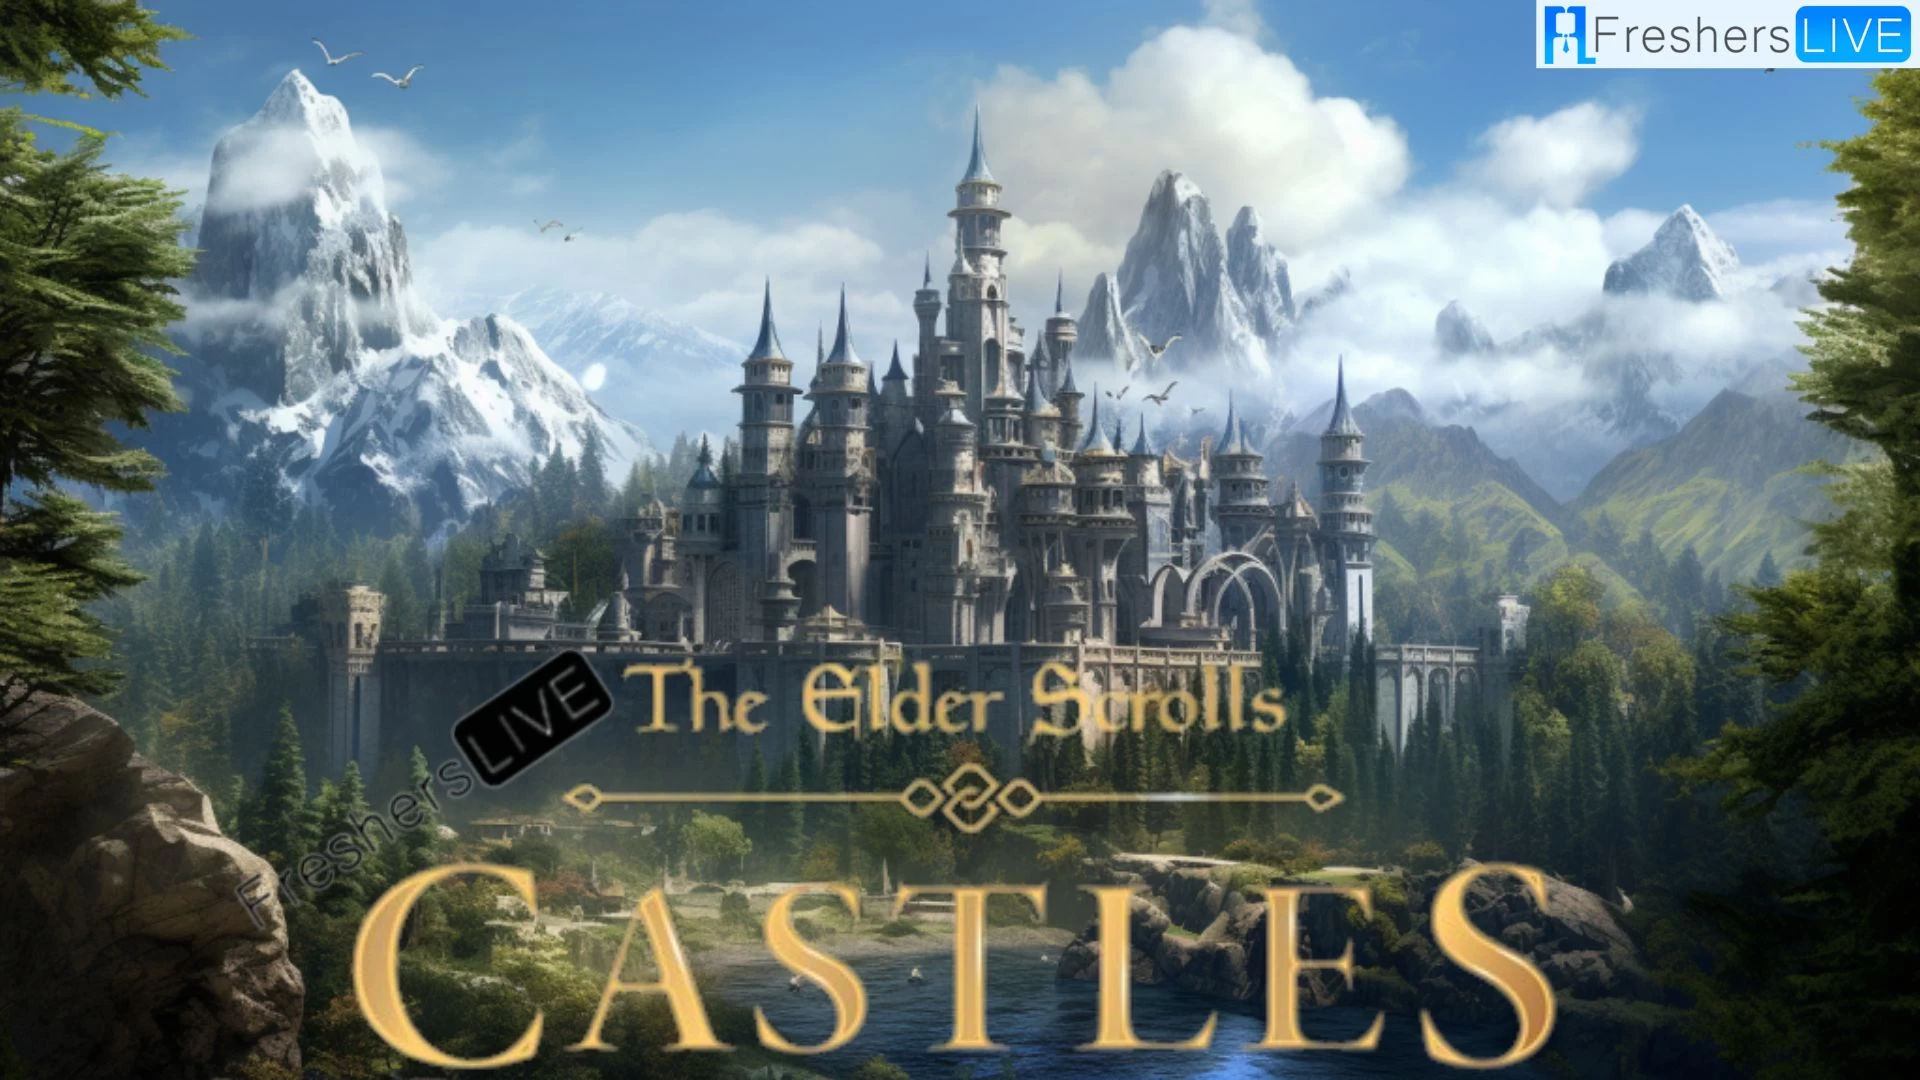 The Elder Scrolls Castles Download Android, Is The Elder Scrolls Castles on iOS?